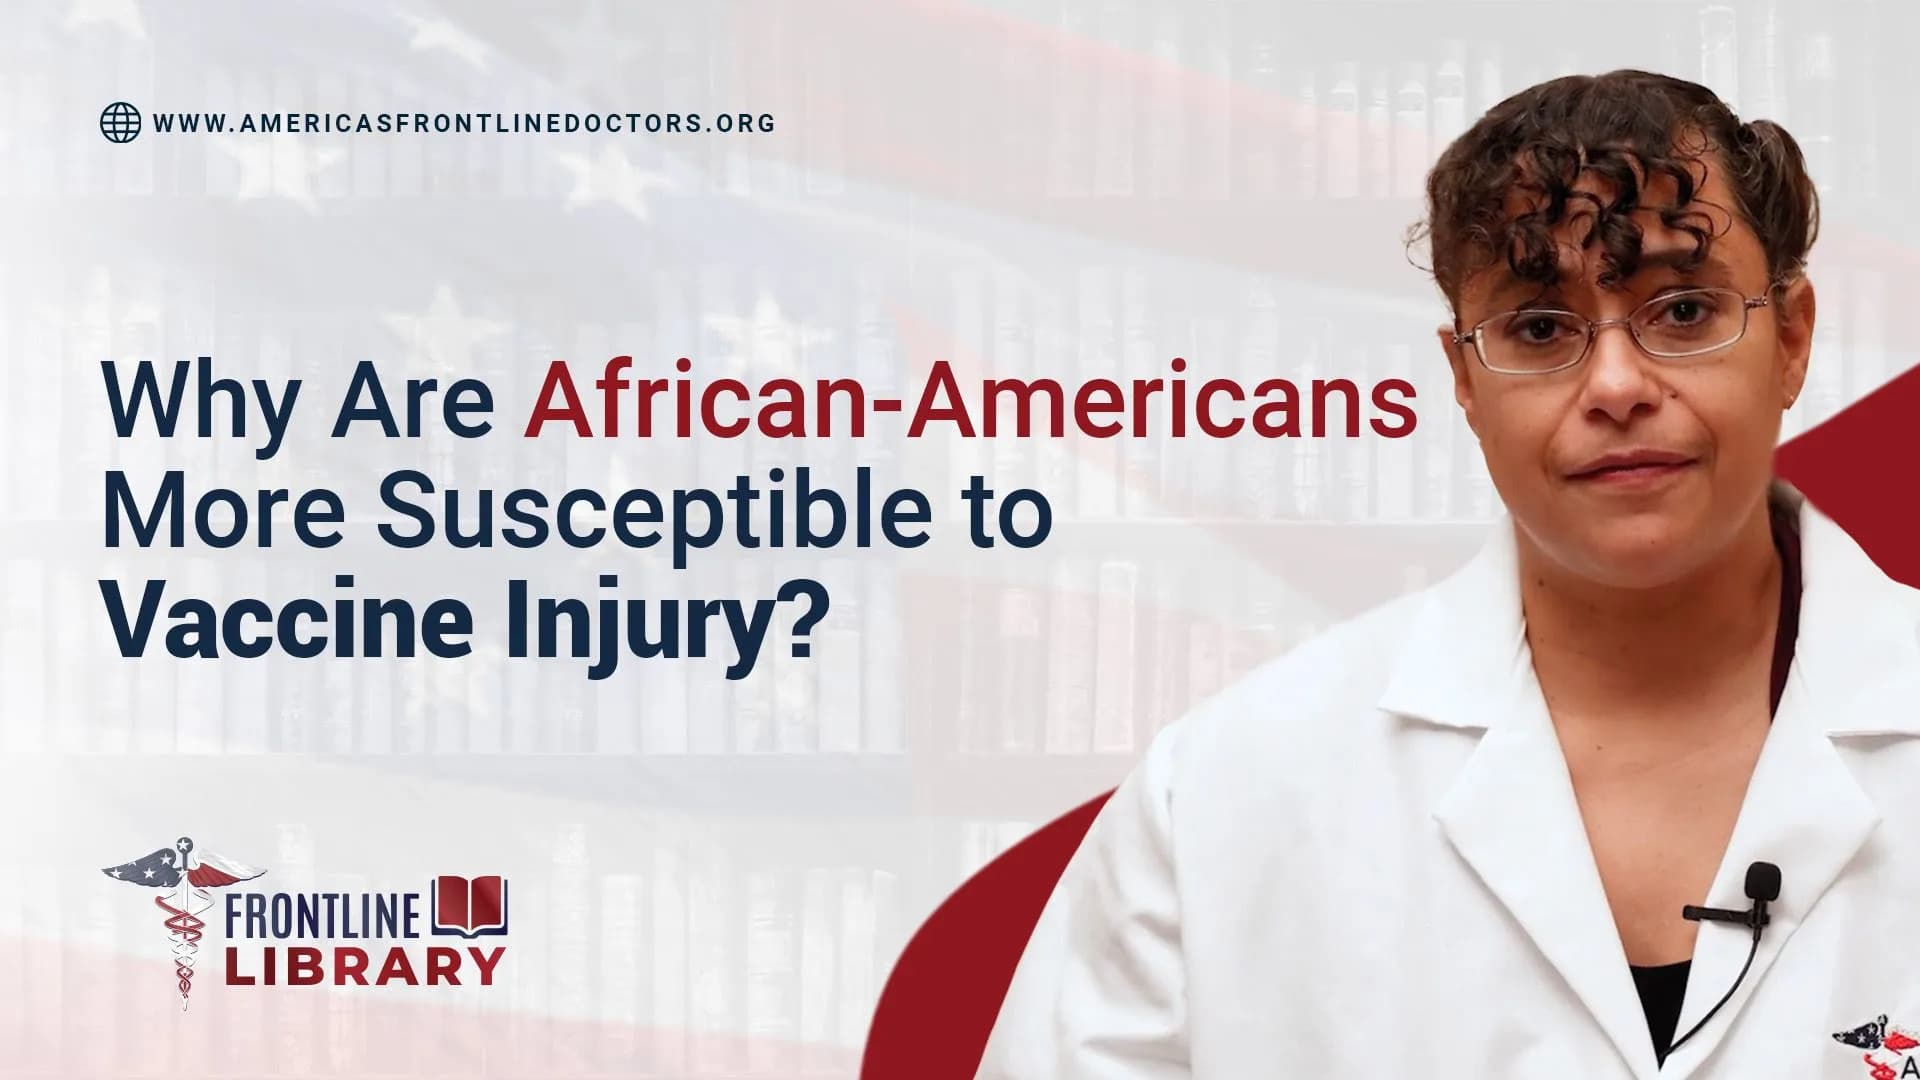 Why Are African-Americans More Susceptible to Vaccine Injury?”